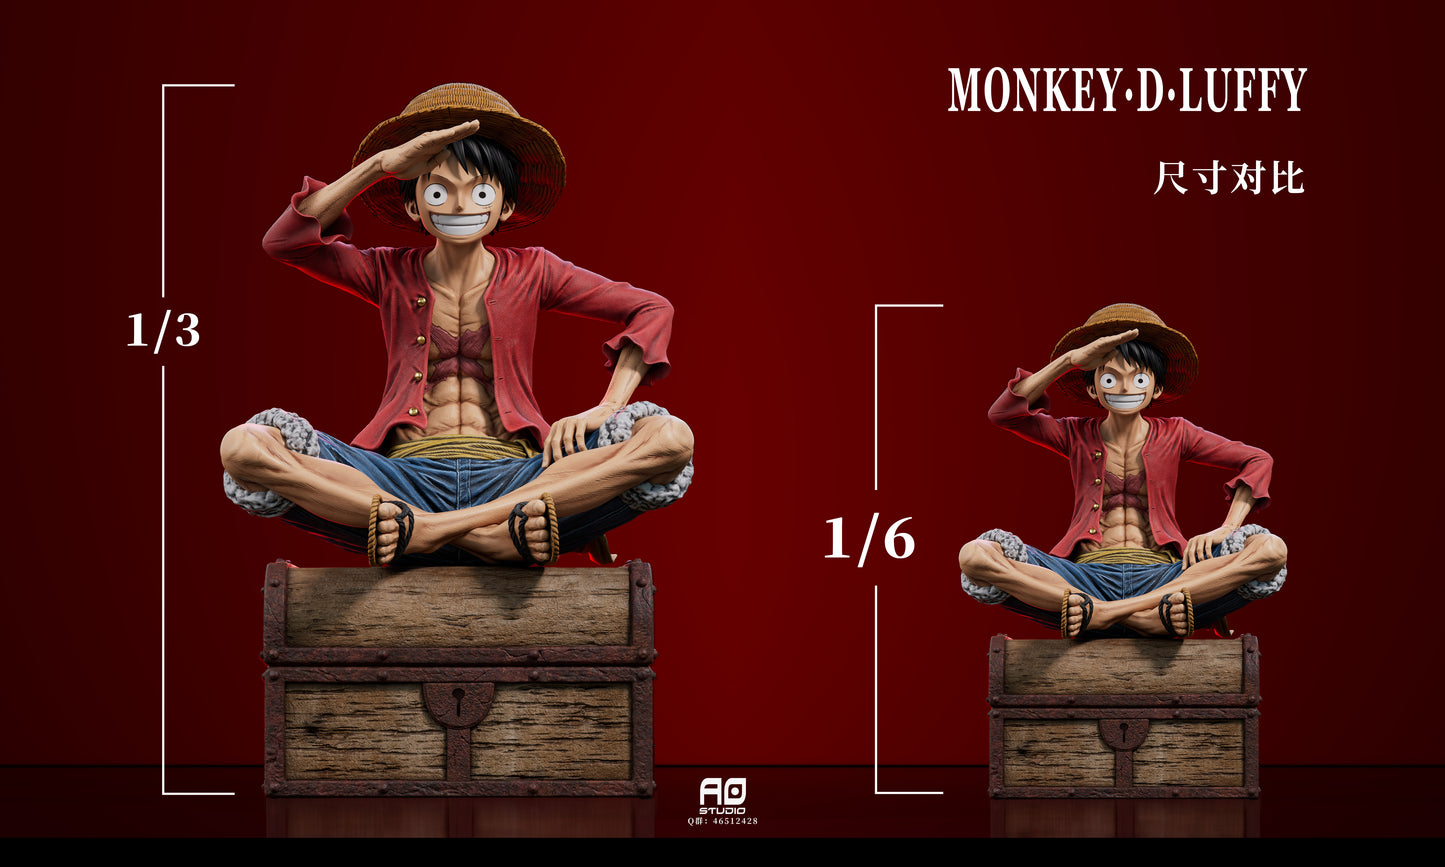 AO STUDIO – ONE PIECE: THREE BROTHERS SERIES 2. LUFFY [IN STOCK]